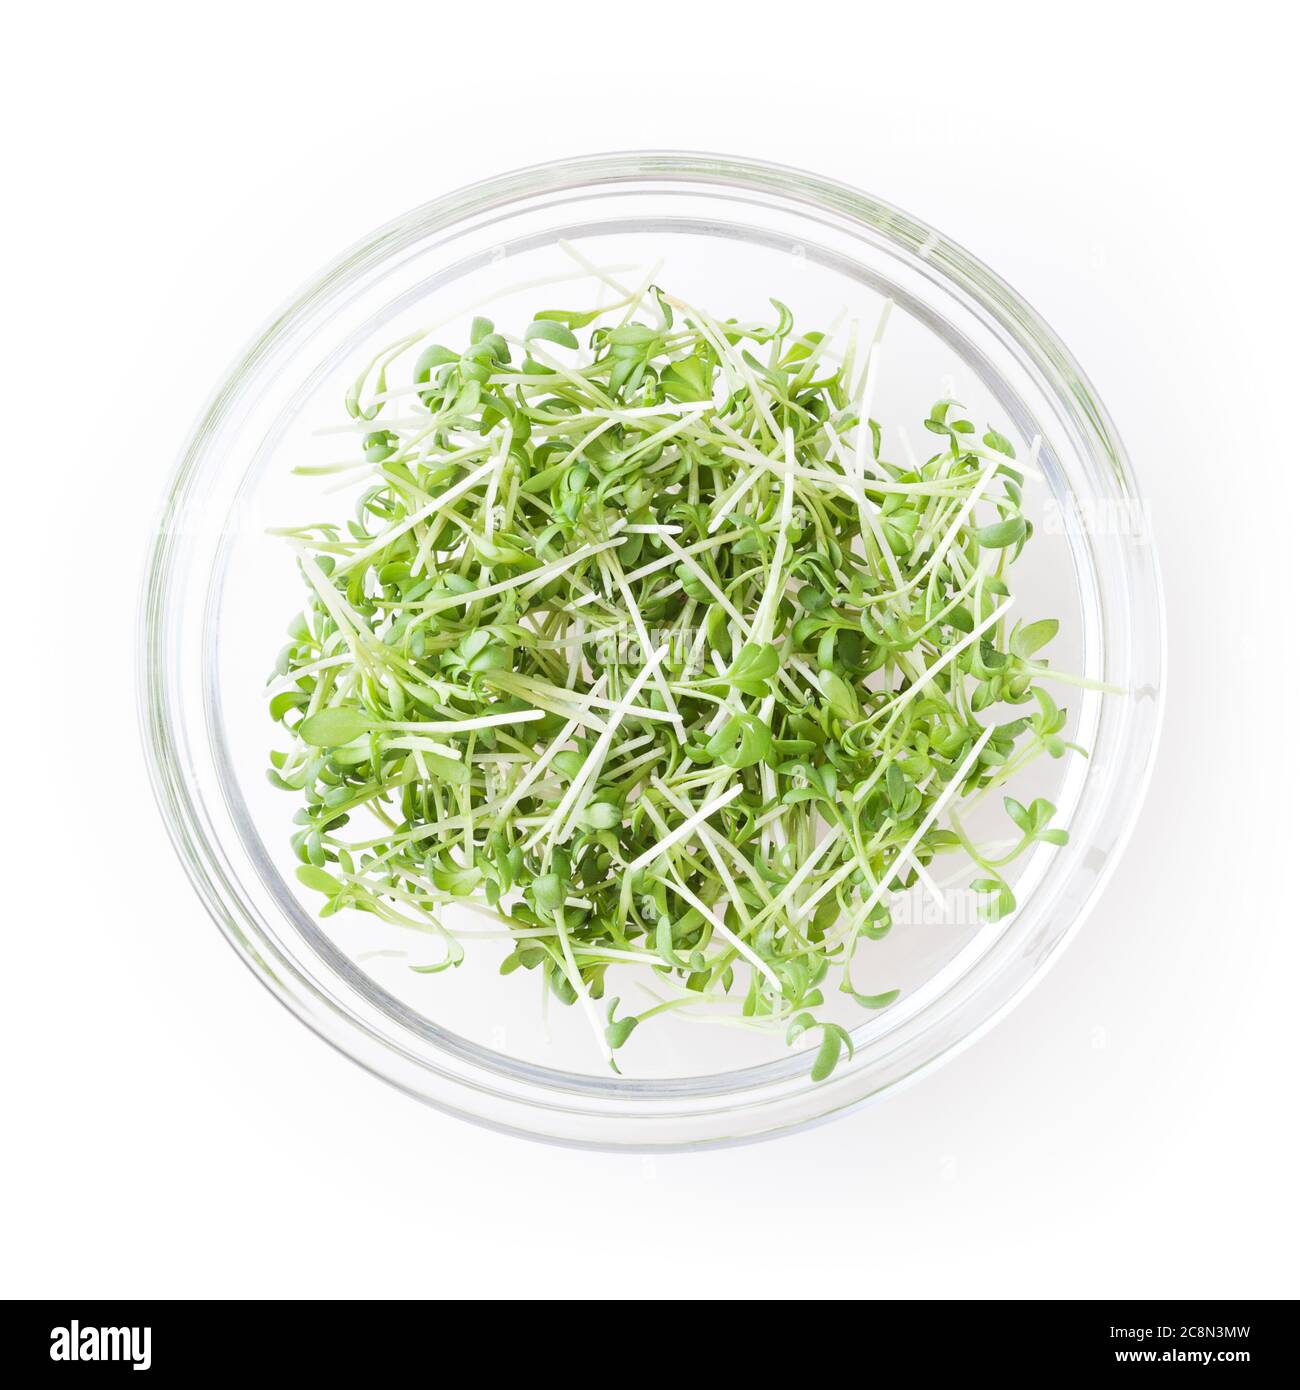 Micro greens garden cress sprouts in glass bowl isolated on white background with clipping path Stock Photo